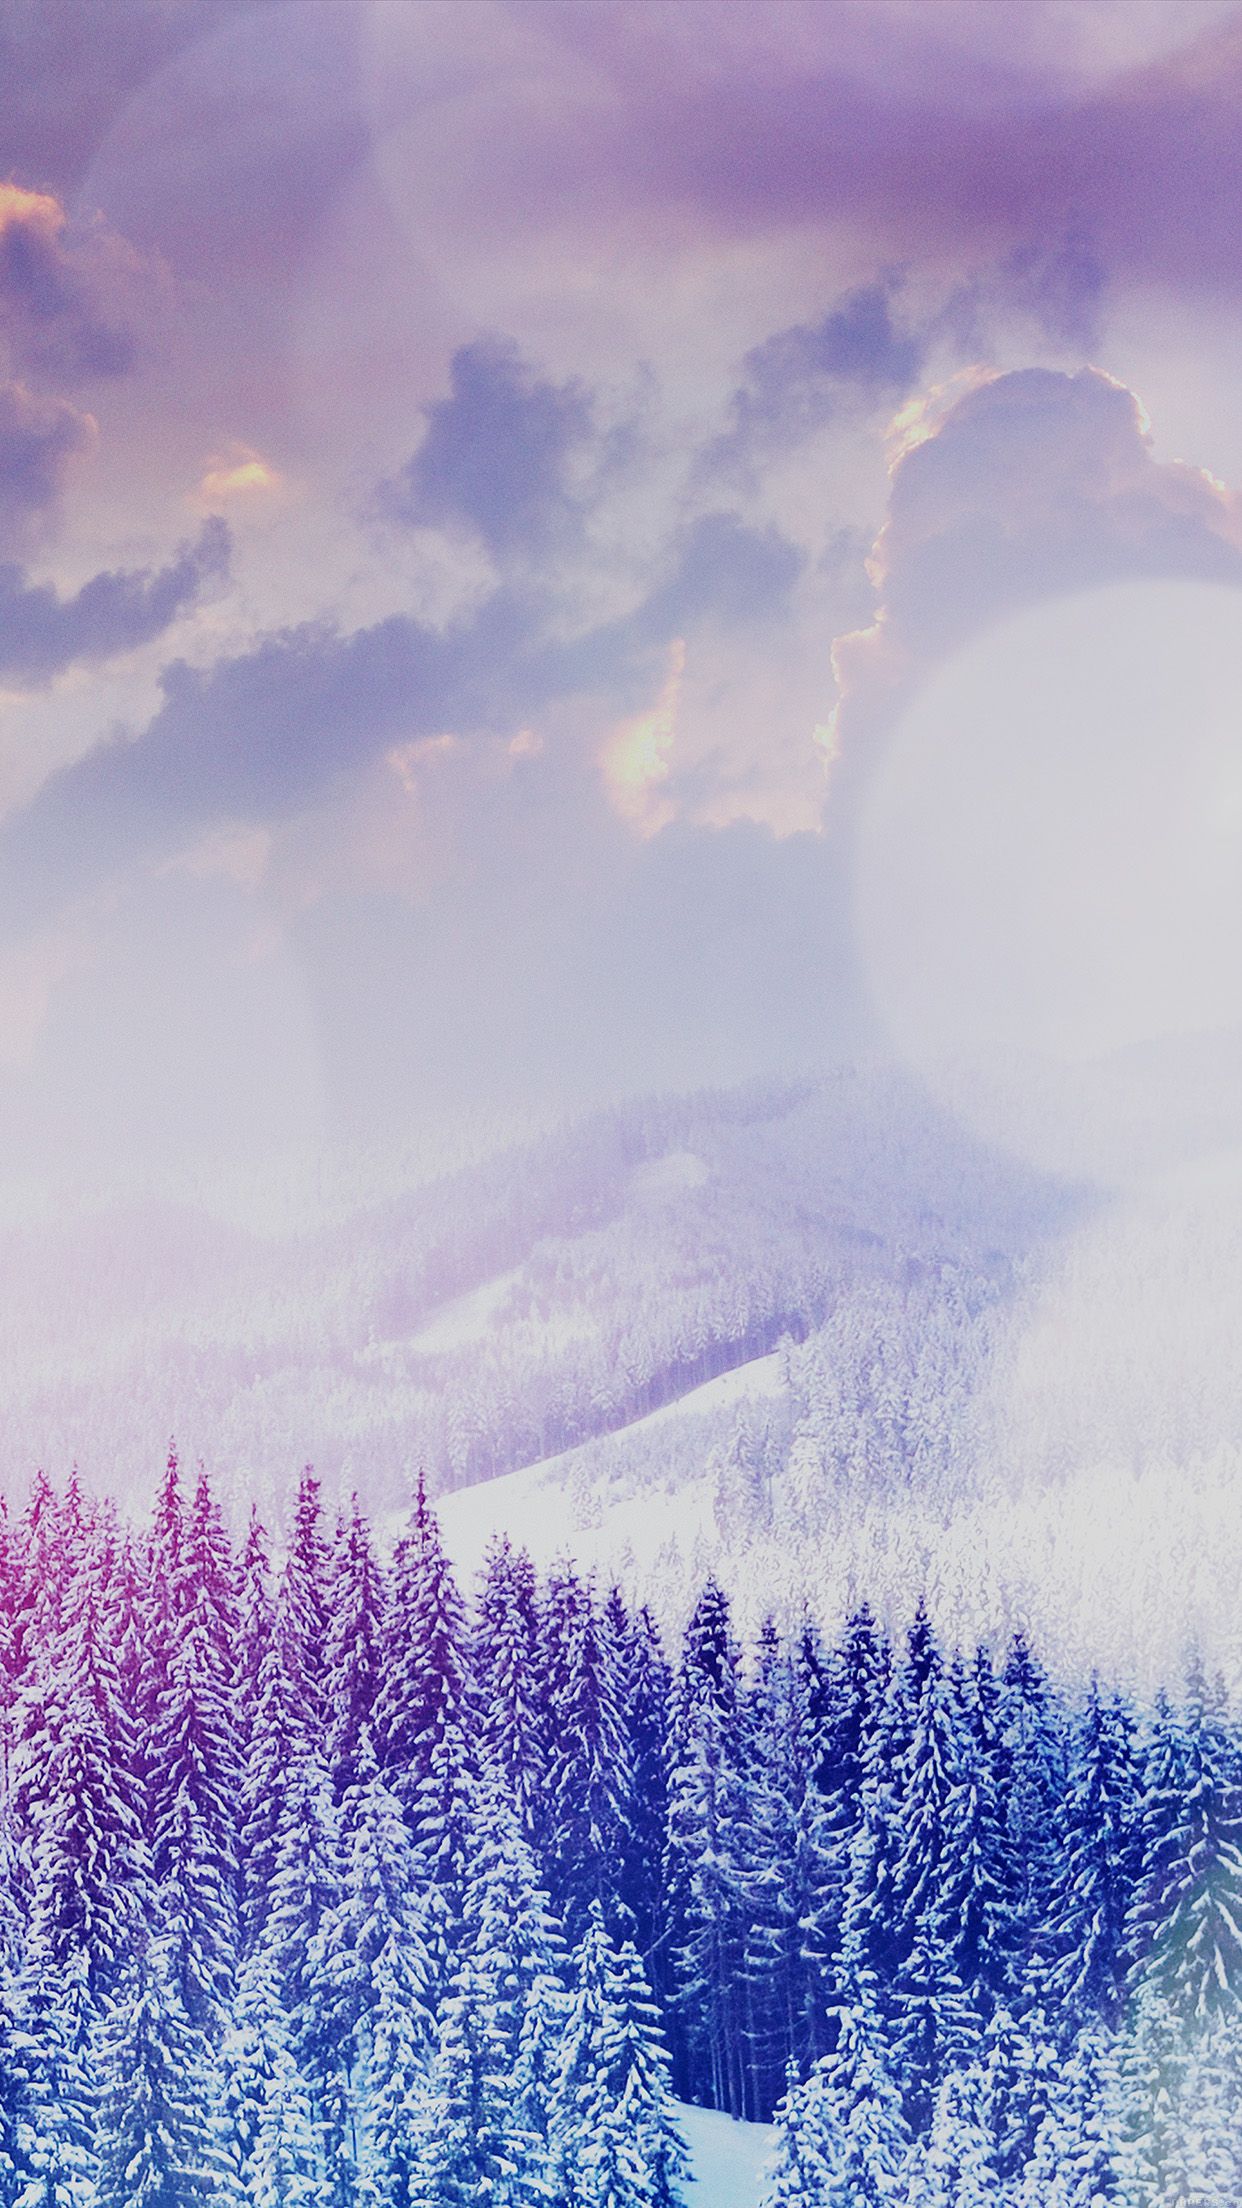 iPhone X wallpaper. winter mountain snow white blue flare nature